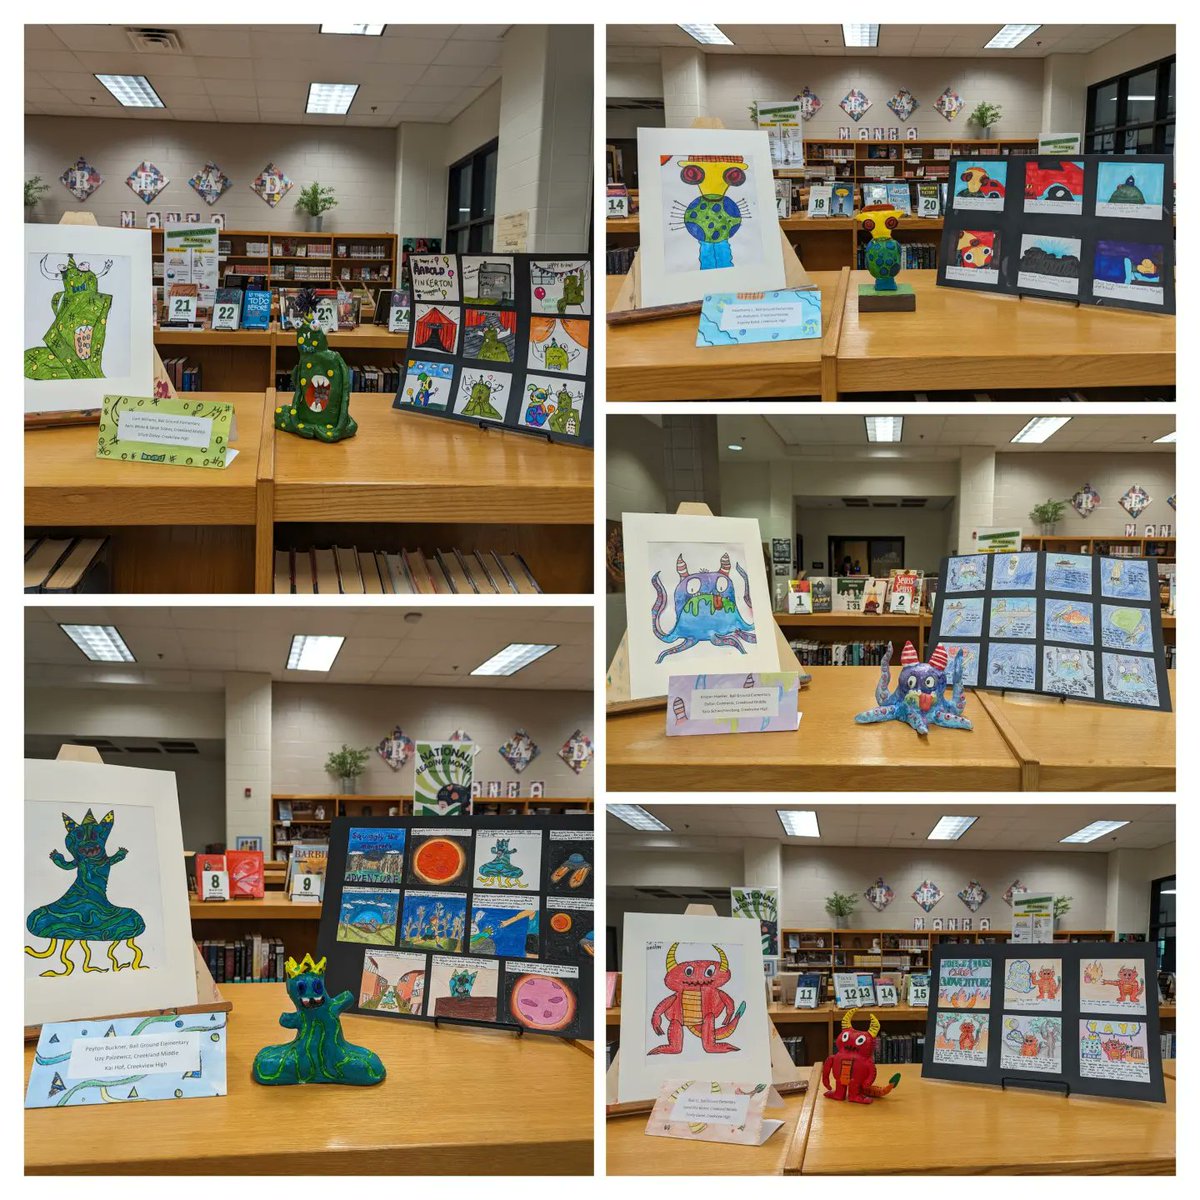 The Creature Feature held at Creekview HS showcased a collaborative art project between students at the elementary, middle, and high school levels. Way to go Liam, Peyton, Ryan, Kristen and Hawthorne for representing BGSA with your artwork at this event! #BGRocks #4tribes1family